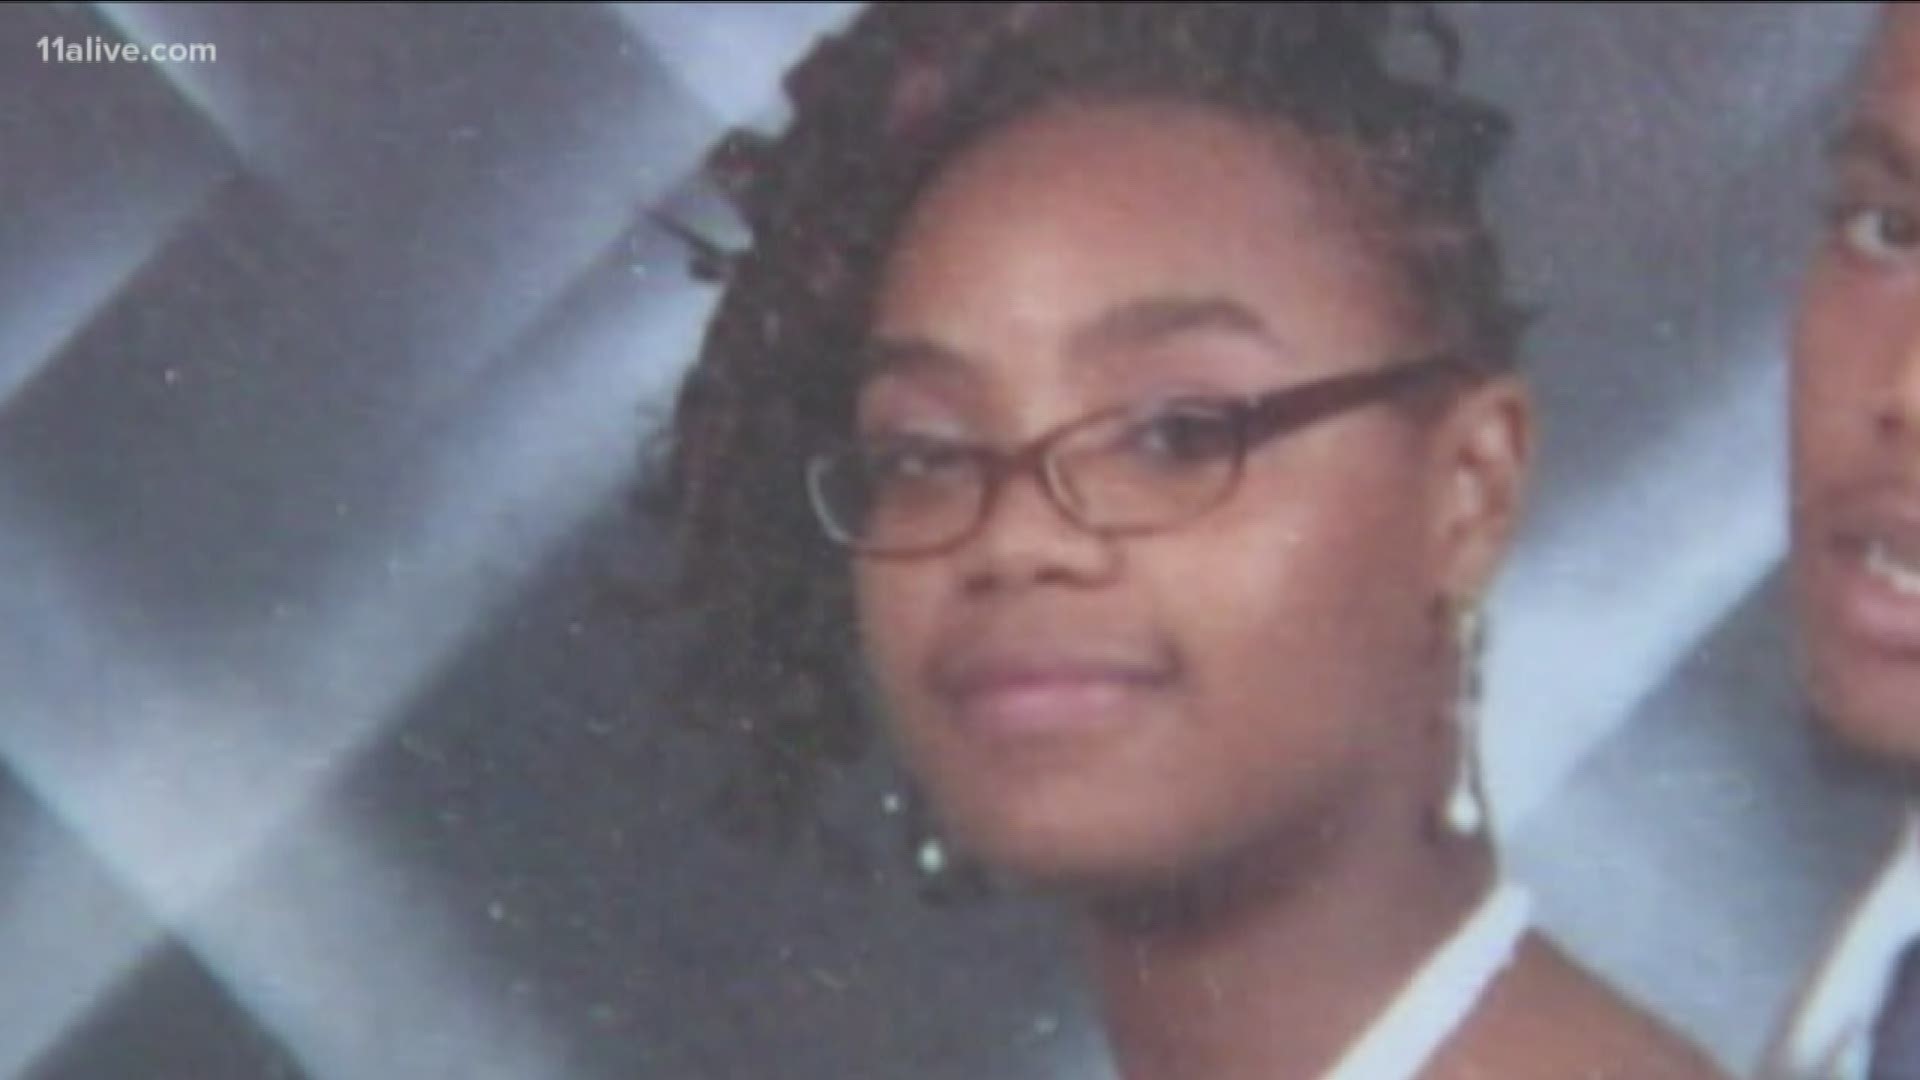 The 19-year-old Spelman freshman who was shot and killed was walking on Clark’s campus in 2009